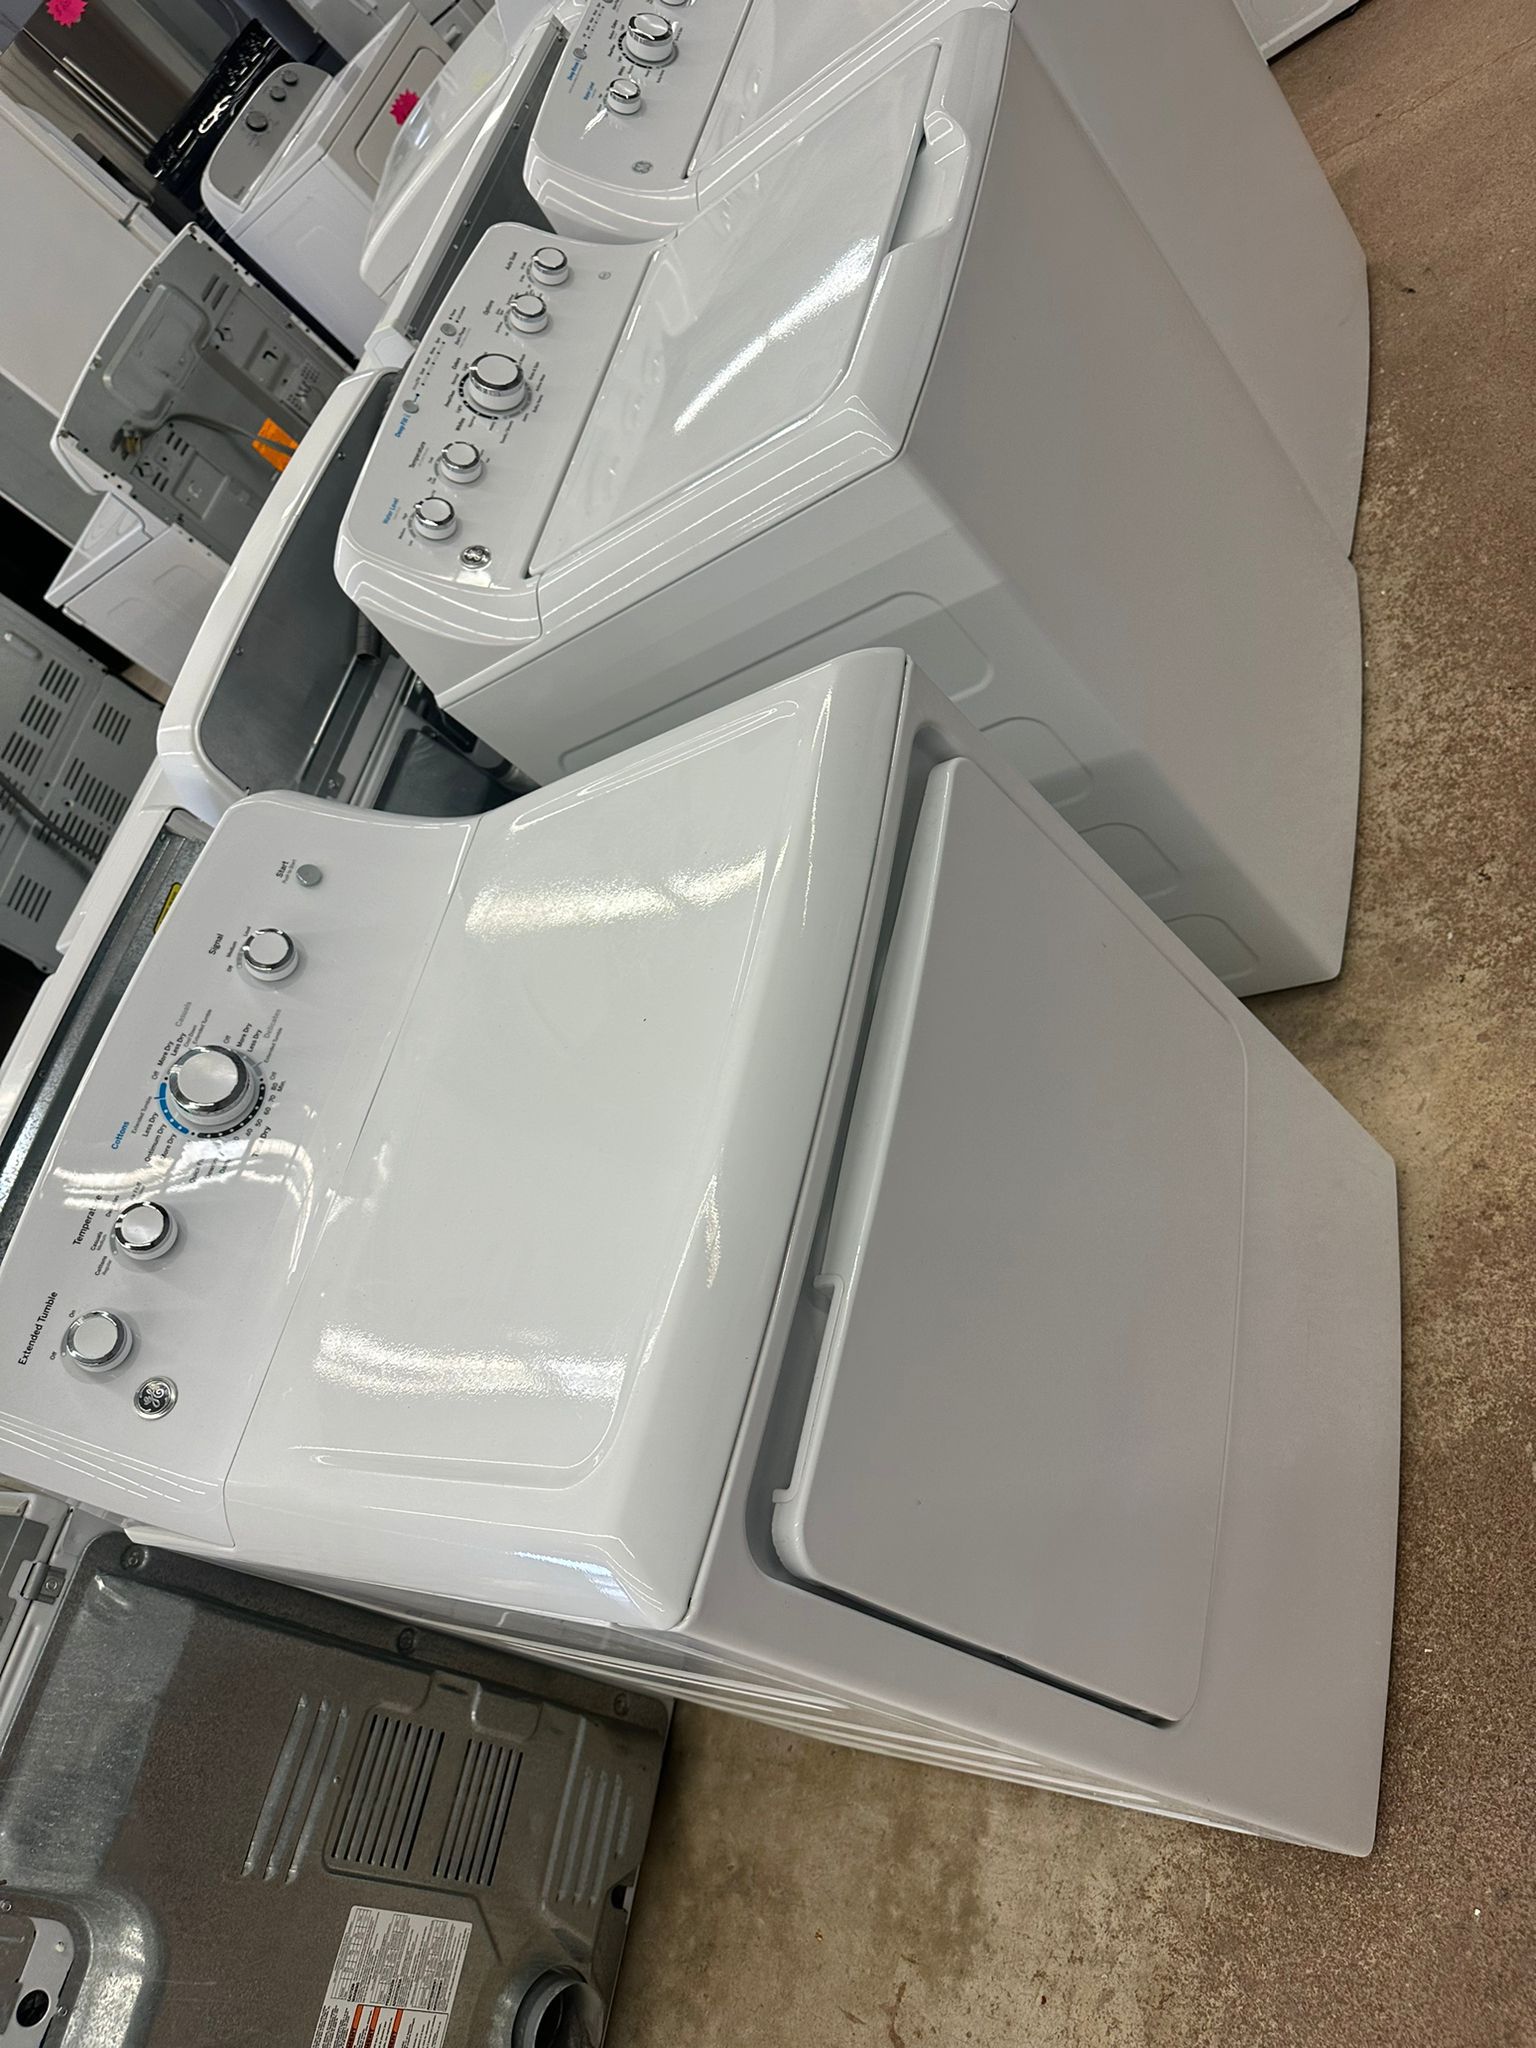 Washer And Dryer Set 